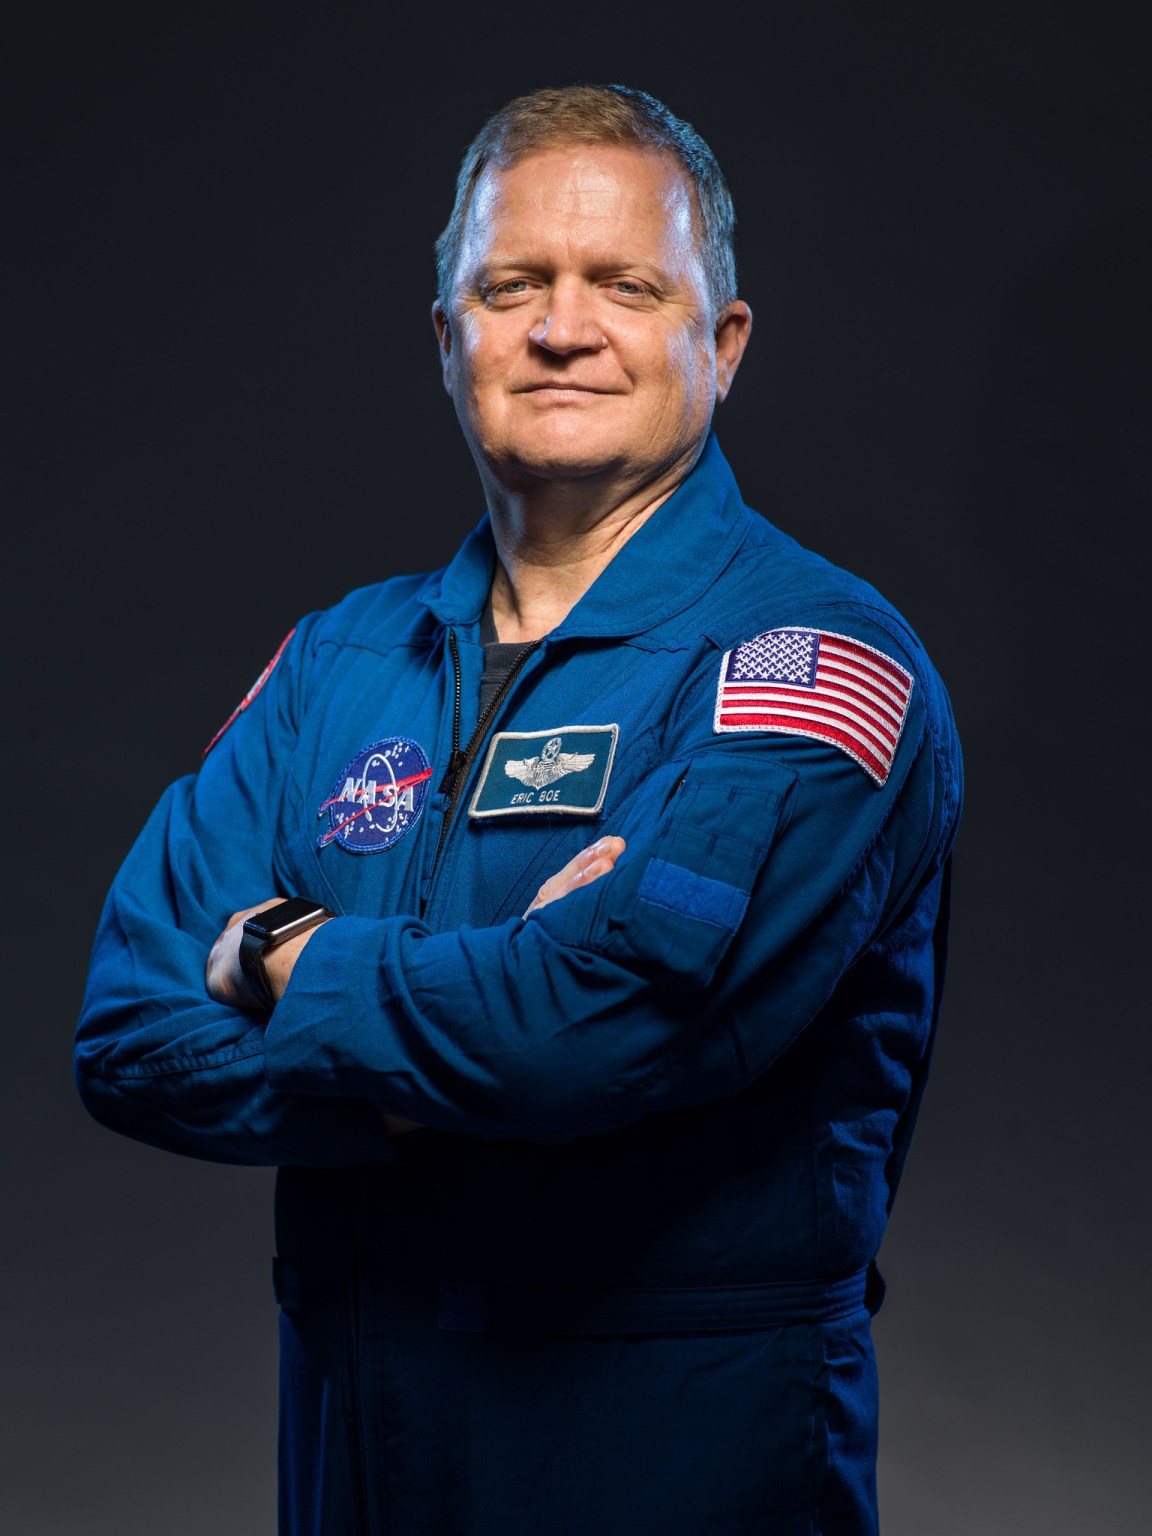 NASA Astronaut Eric Boe was assigned to the first flight of Boeing’s CST-100 Starliner in August 2018. ﻿